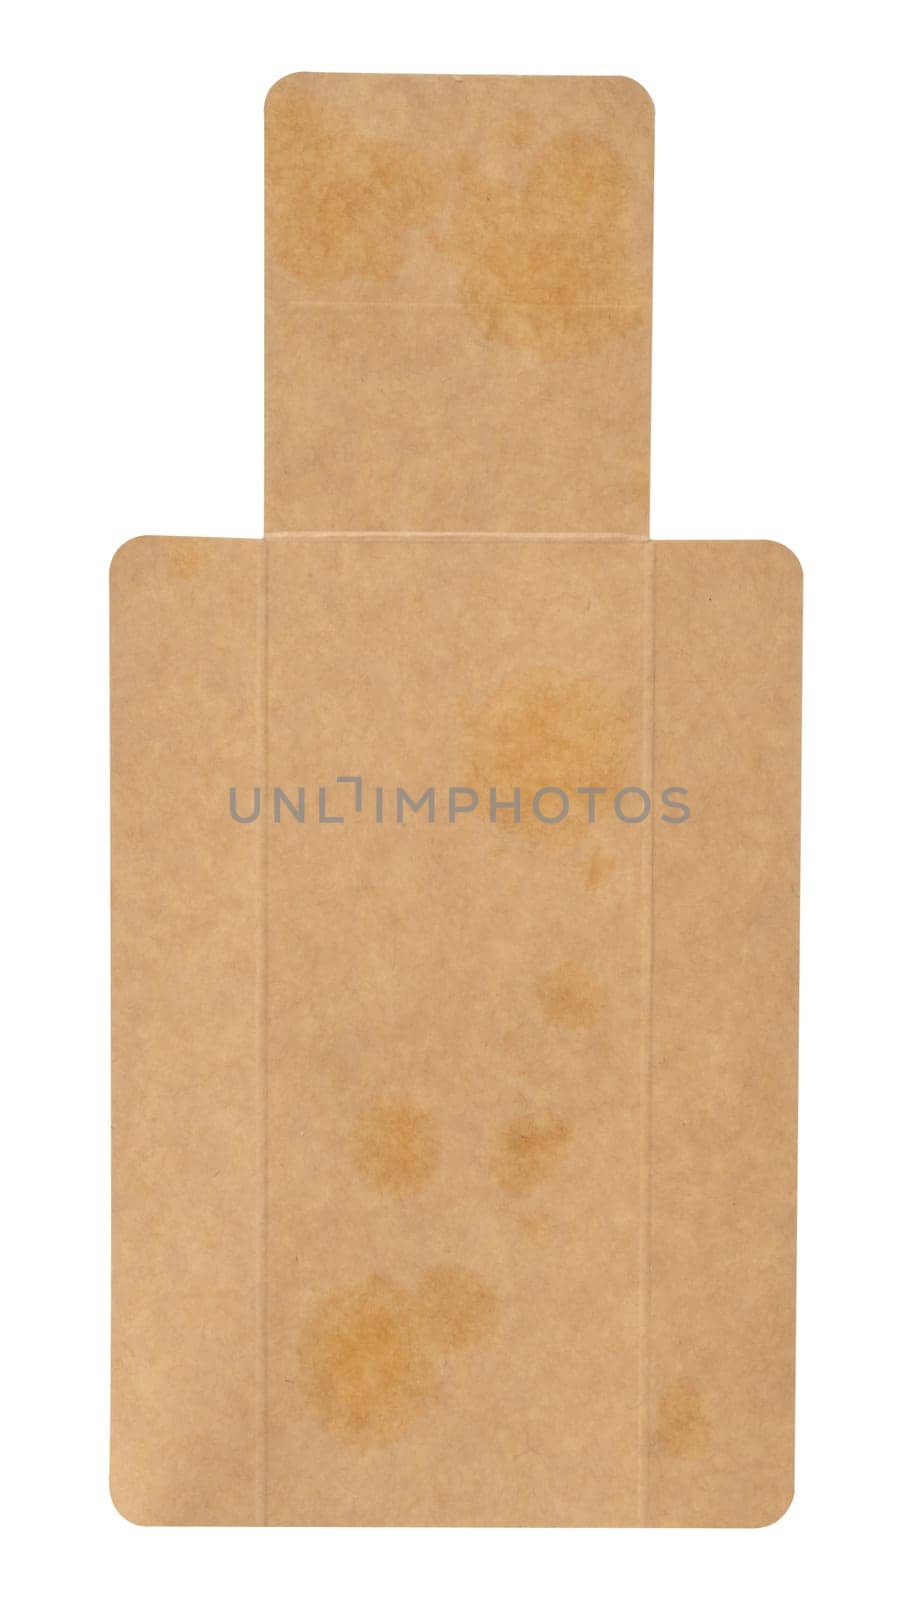 Brown cardboard liner for box on isolated background